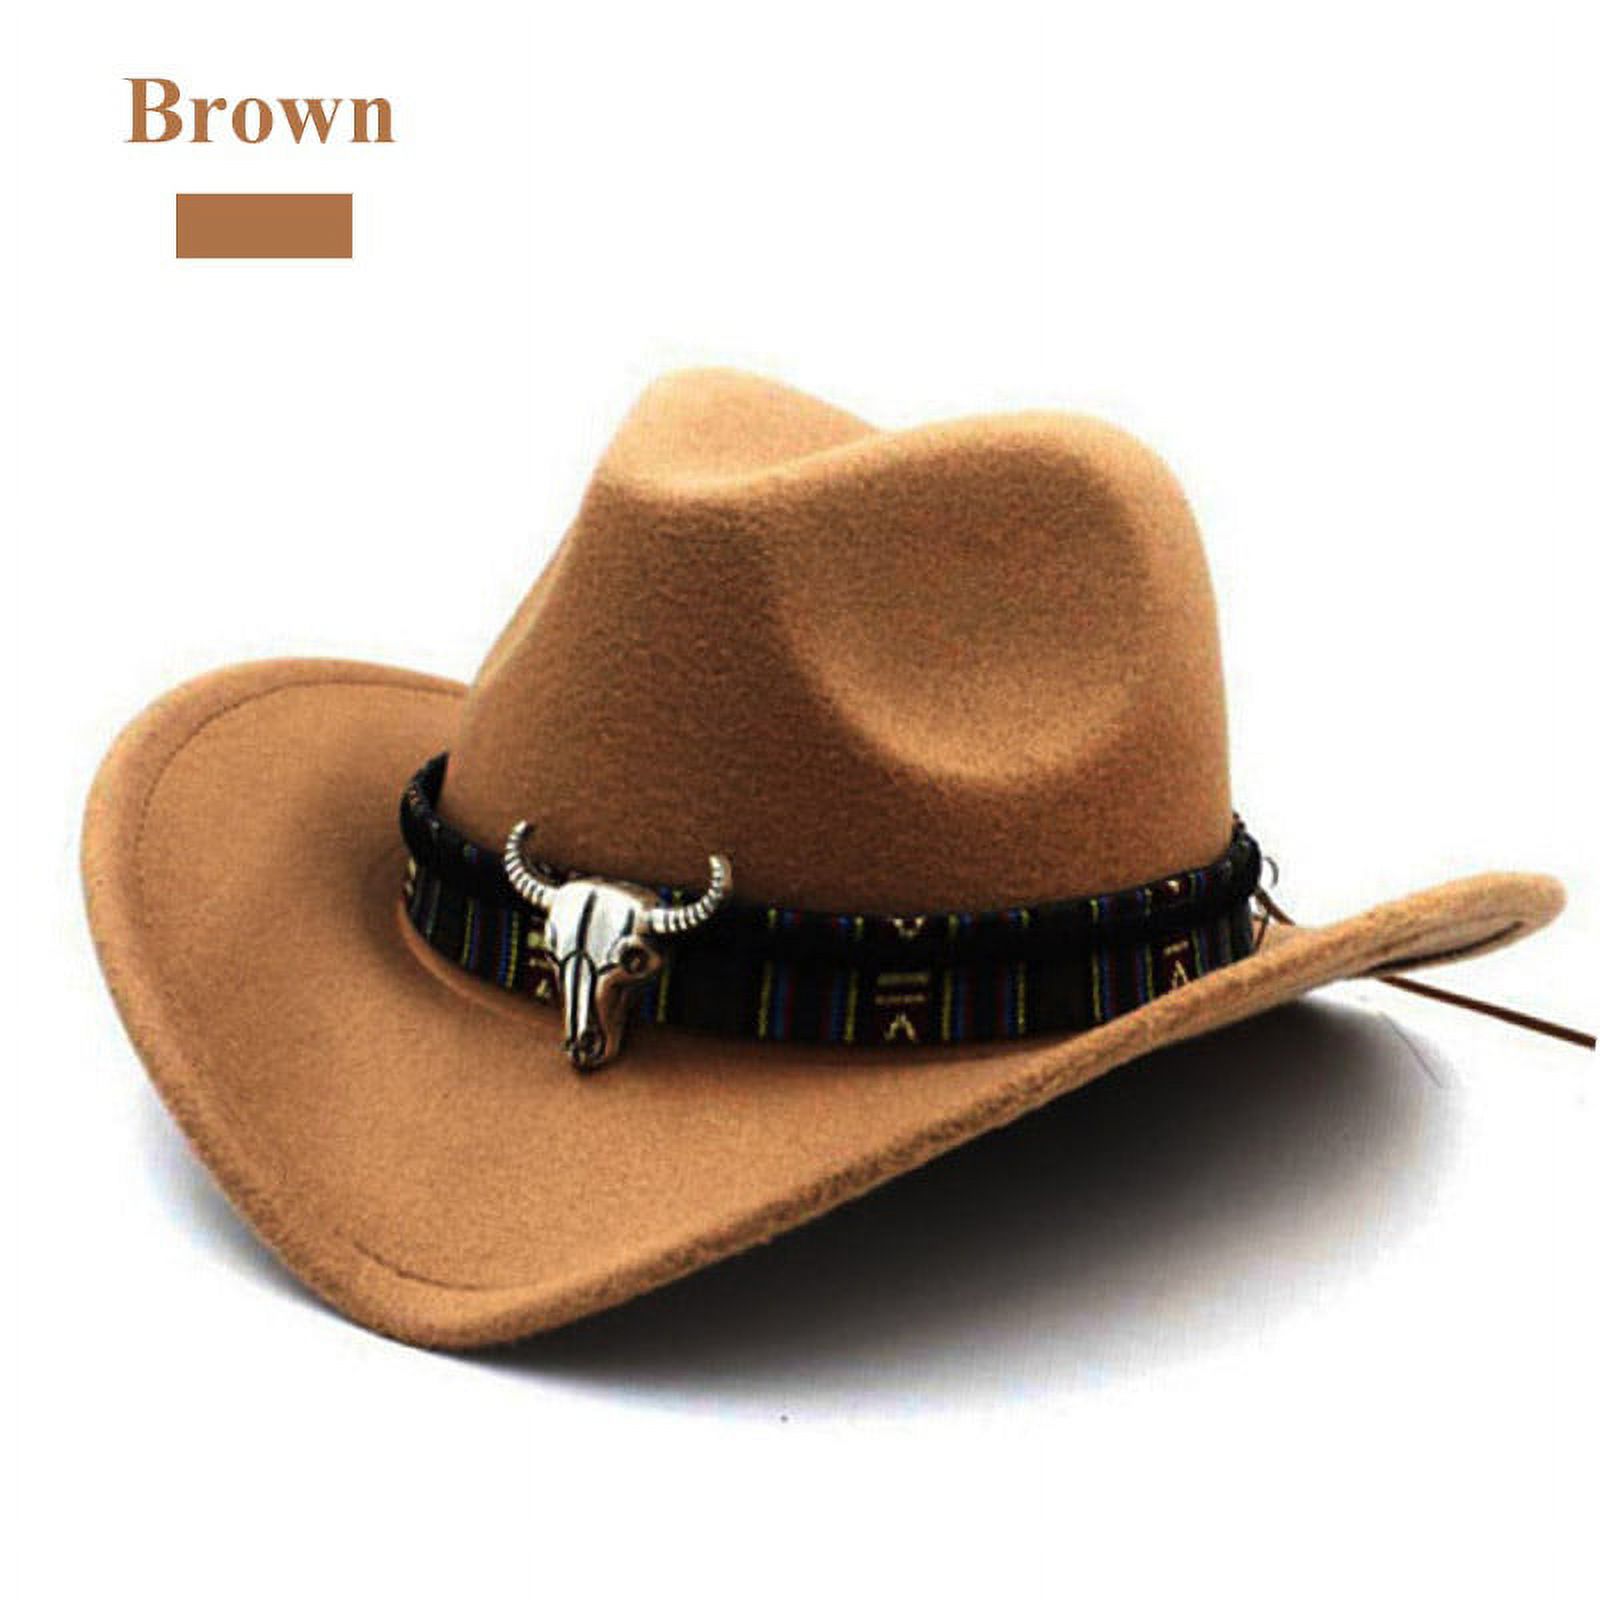 Outdoor Casual Fashion Personality hat Summer Spring Autumn Winter Wool Hat Women Men Ethnic Style Western Cowboy Hat for Lady Tassel Felt Cowgirl Sombrero Caps Travel Sun Hat Wild hat - image 5 of 8